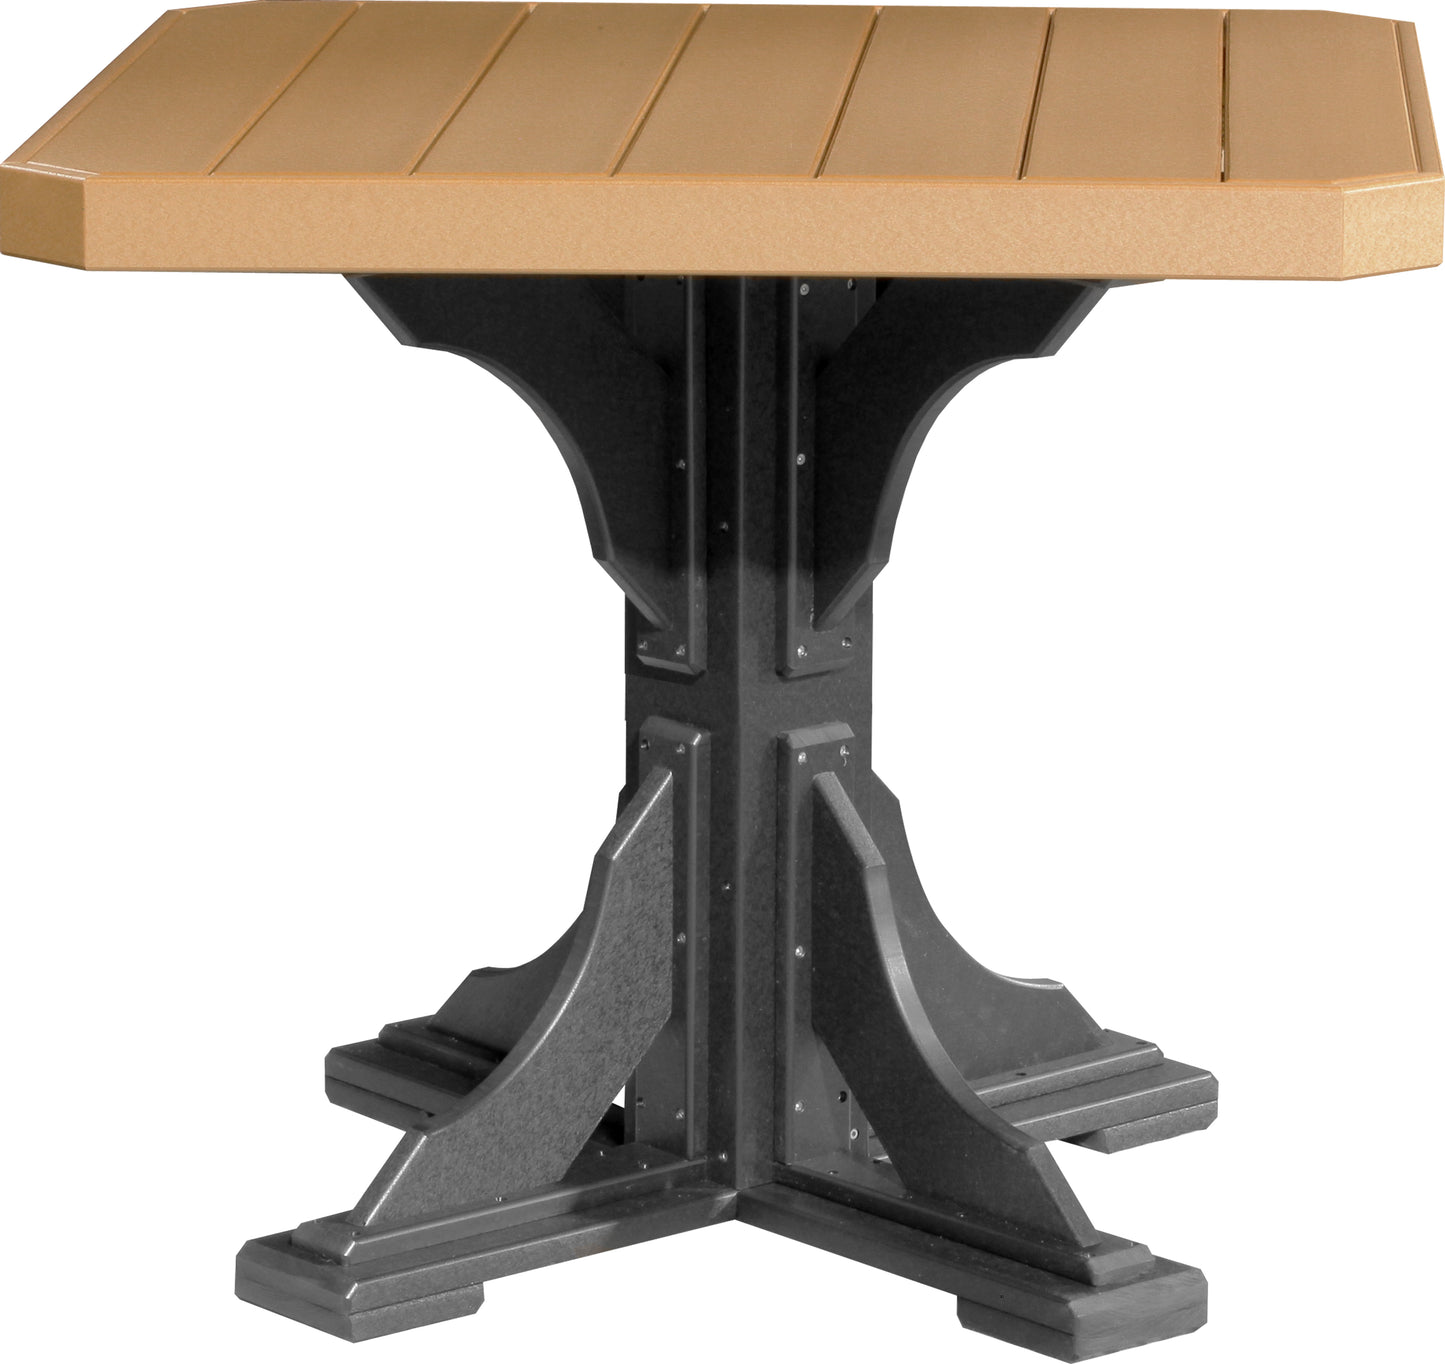 LuxCraft Recycled Plastic 41" Square Dining Height Table - LEAD TIME TO SHIP 3 TO 4 WEEKS